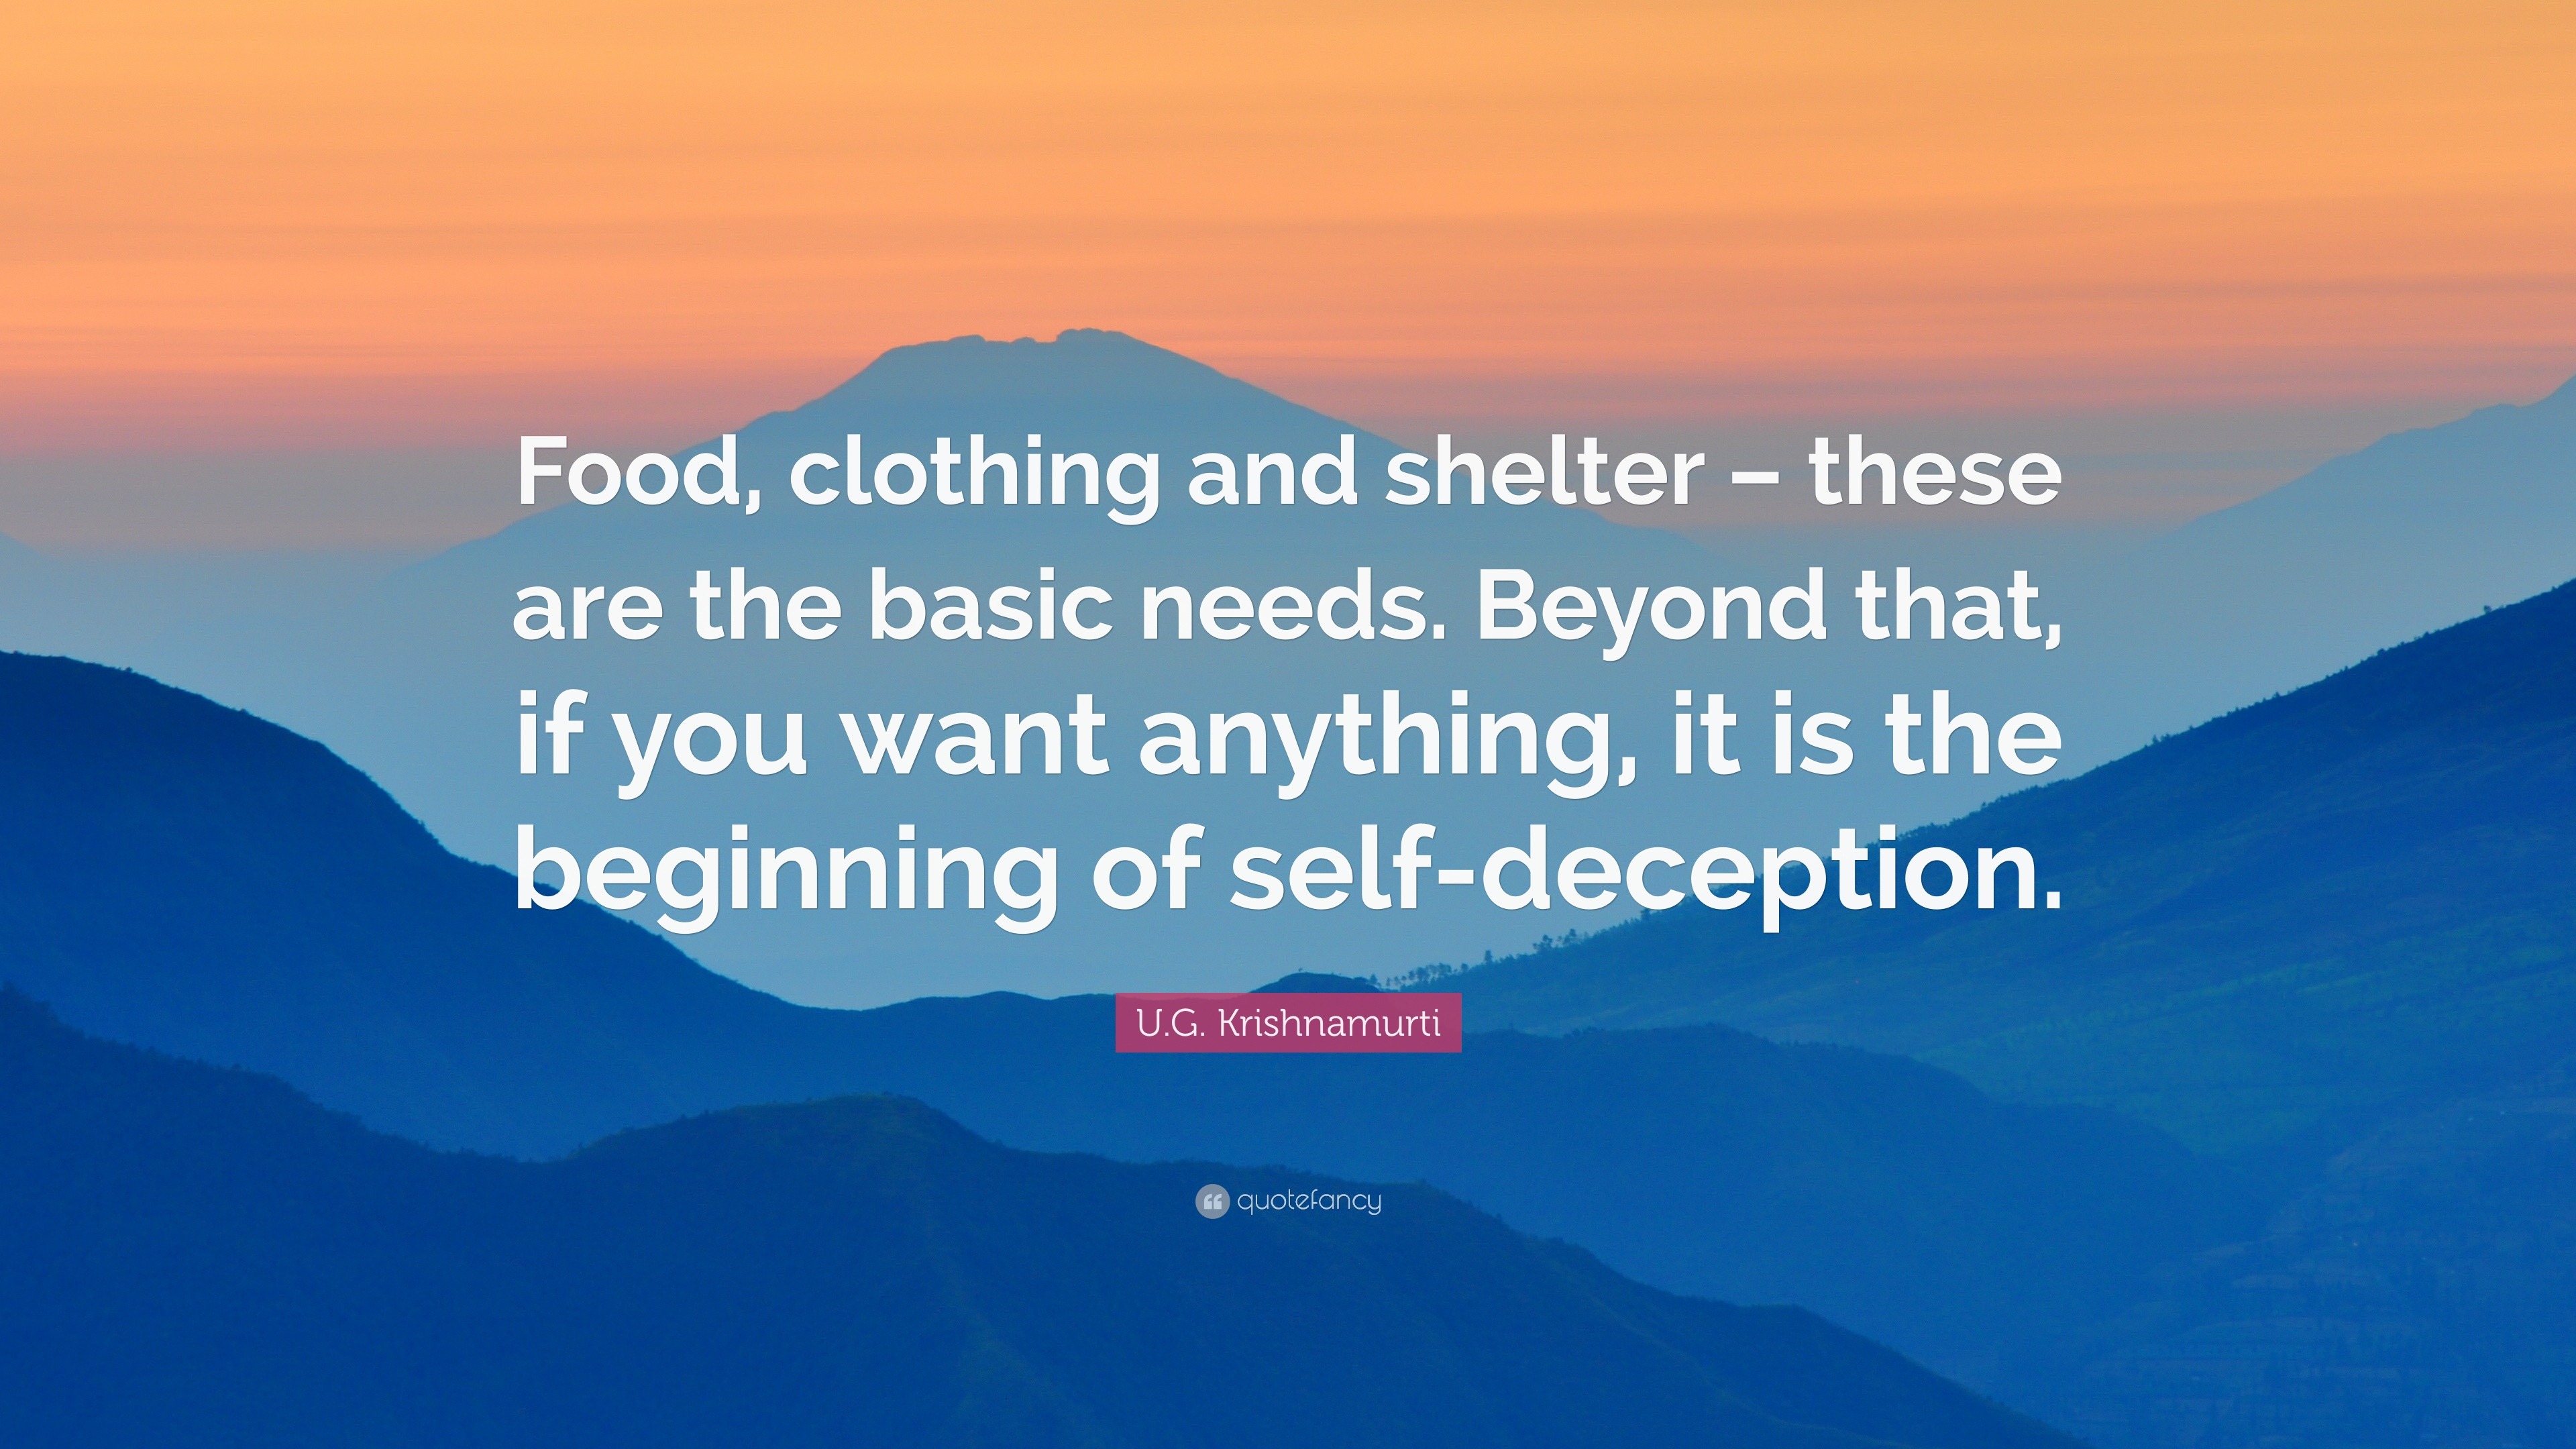 U.G. Krishnamurti Quote: “Food, clothing and shelter – these are